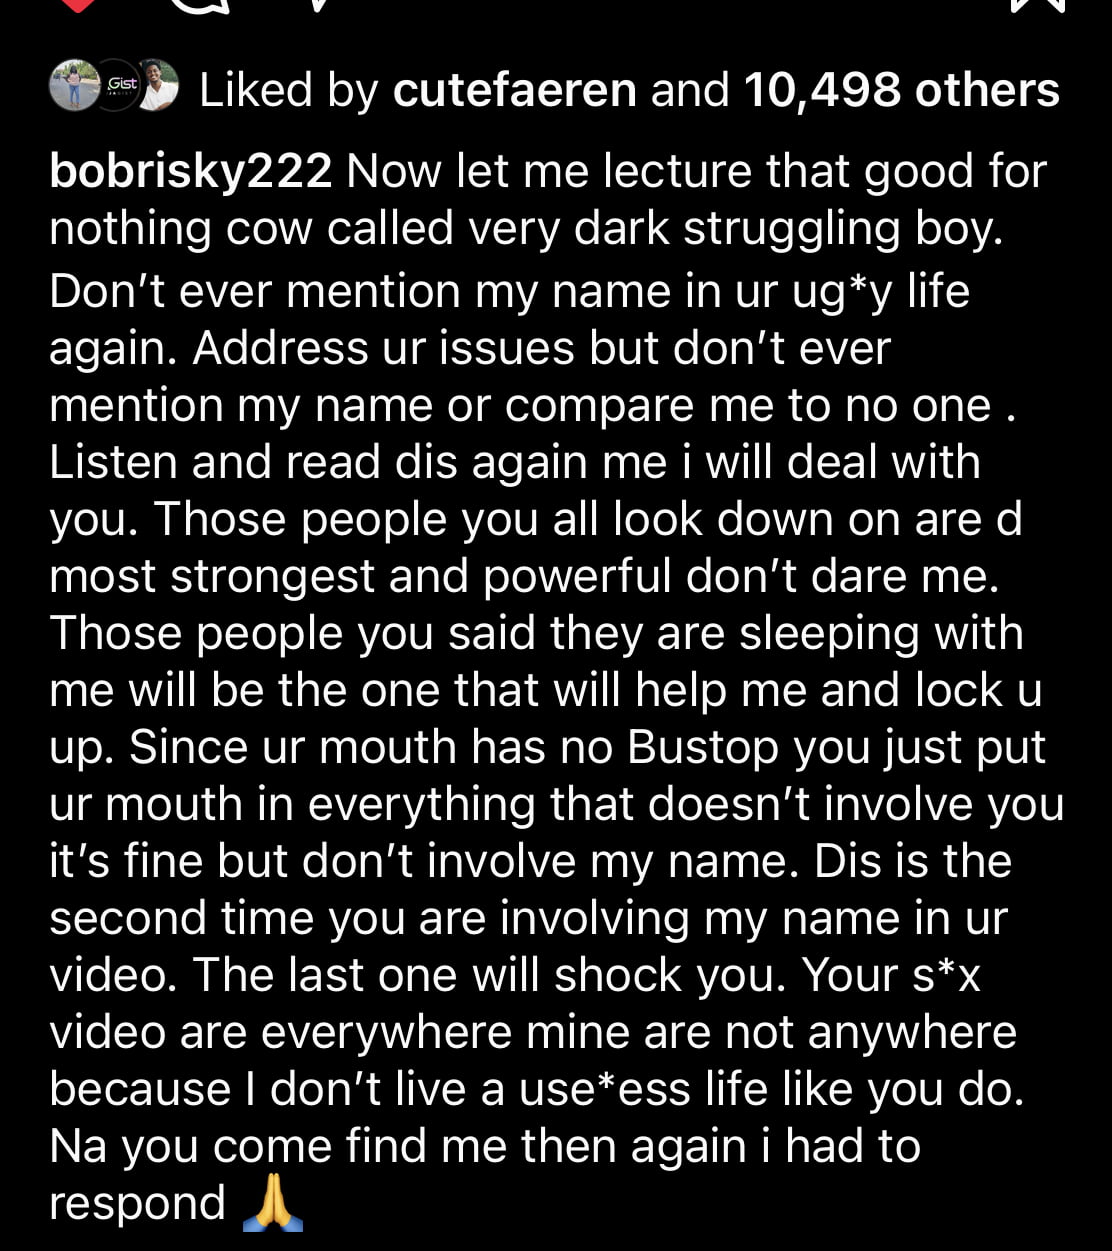 Bobrisky blows hot at Very Dark Black Man for alleging that he sleeps with lawmakers.